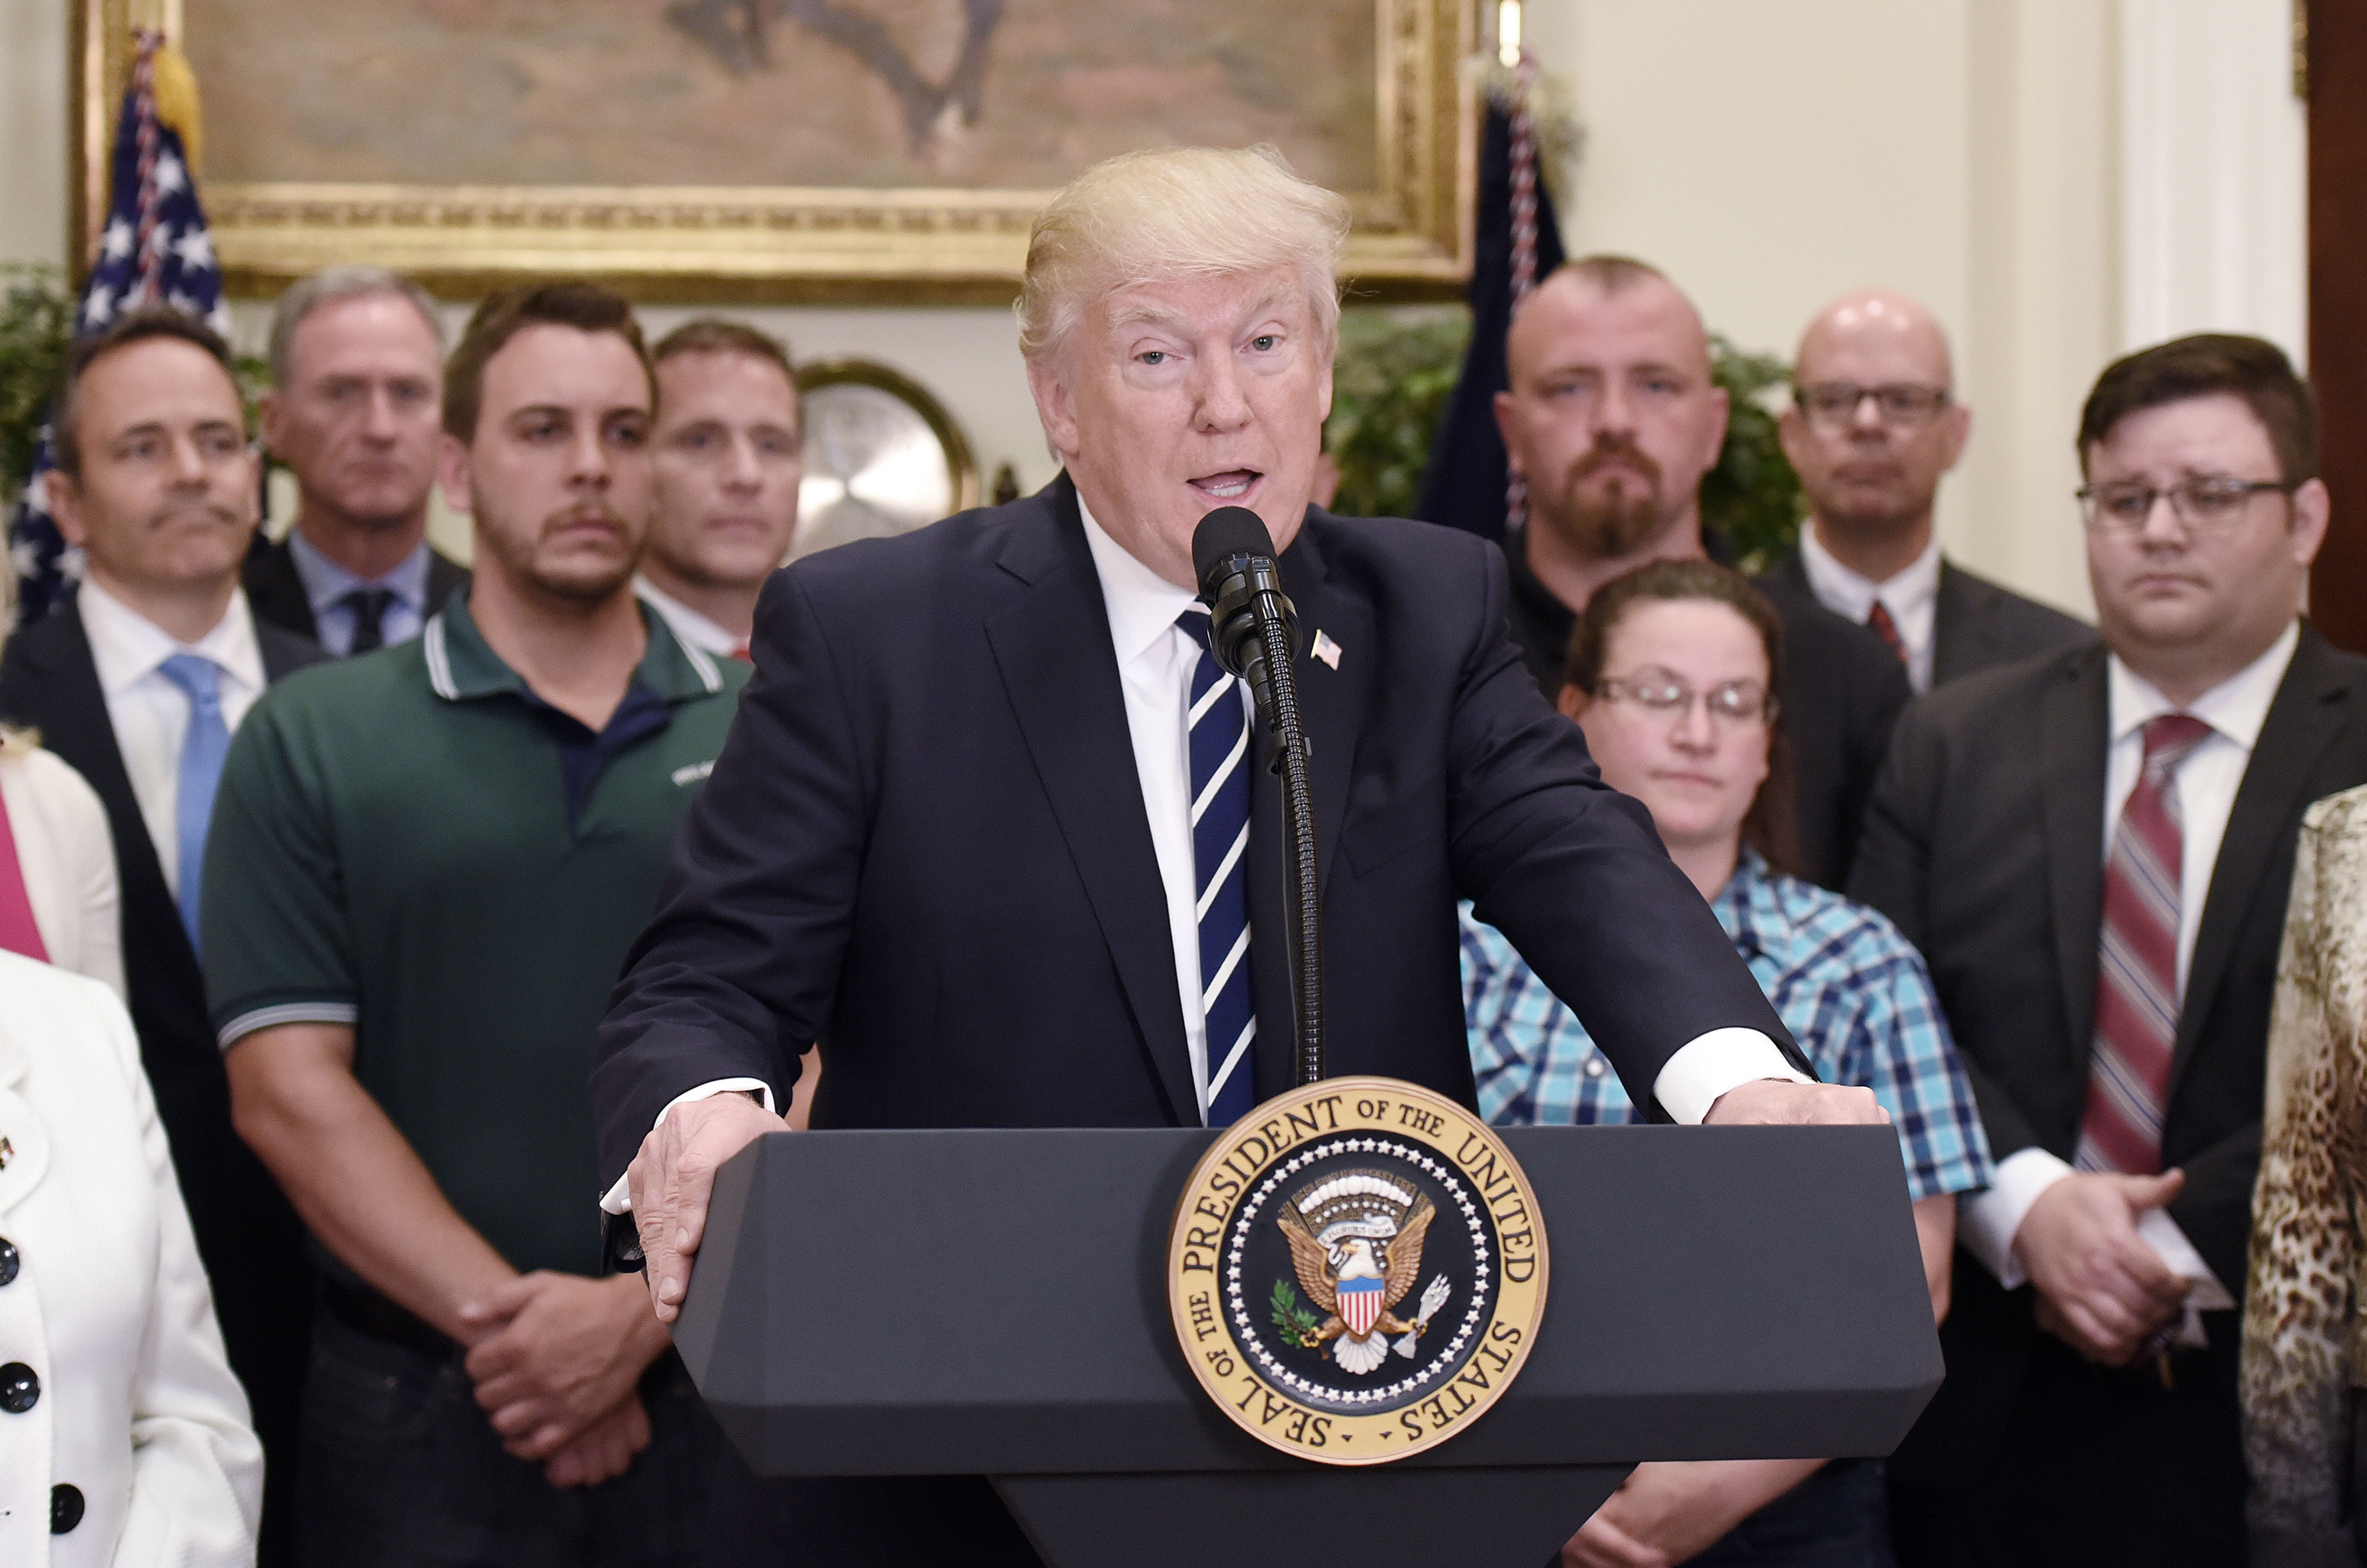 U.S. President Donald Trump delivers remarks on his executive order that aims to expand apprenticeships to train people for millions of unfilled skilled jobs.(Olivier Douliery-Pool/GettyImages)